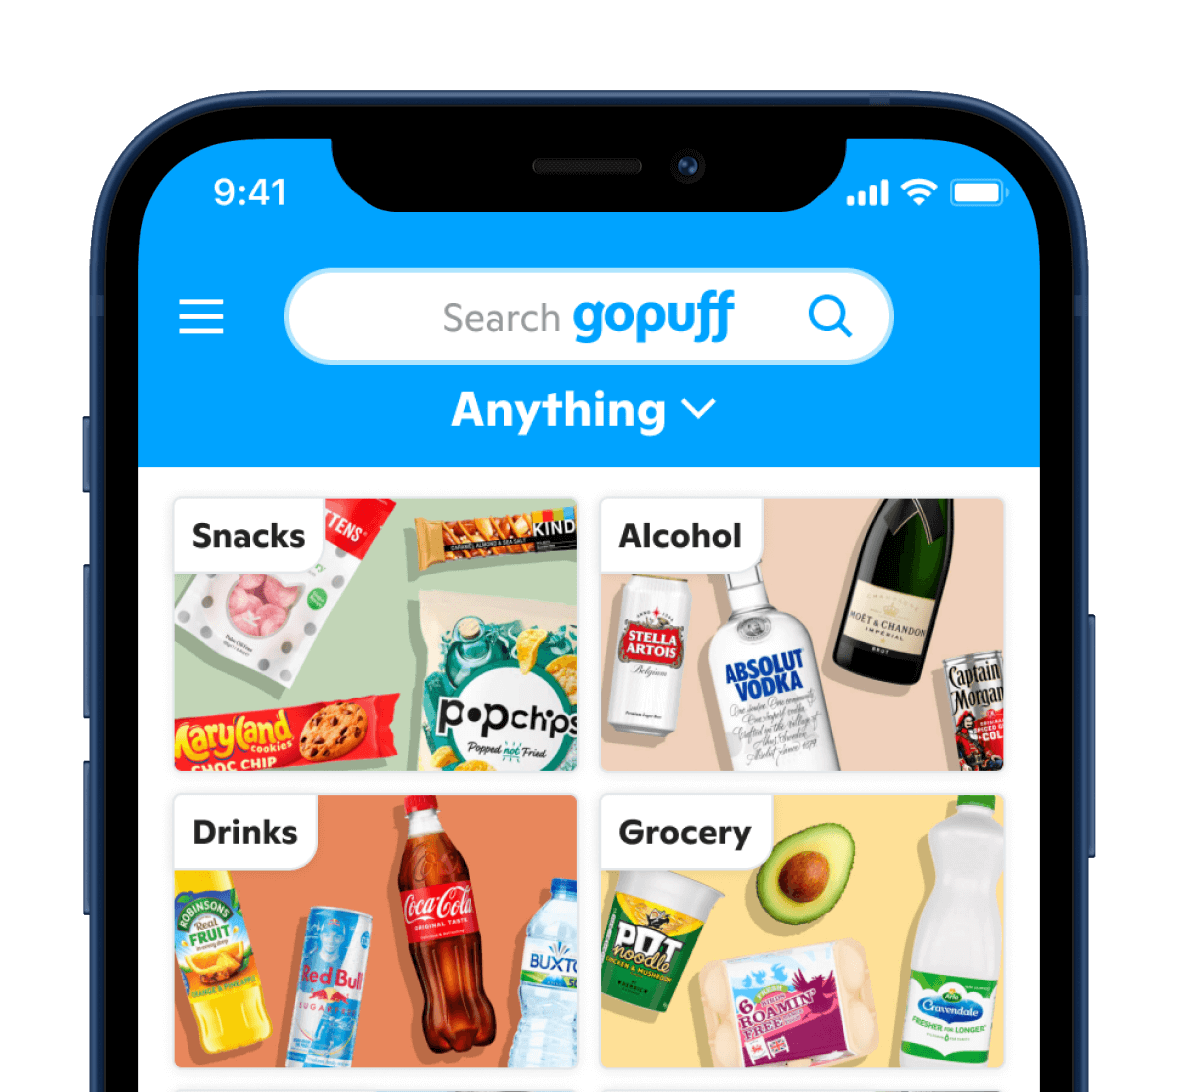 Phone Mockup With Gopuff App Open